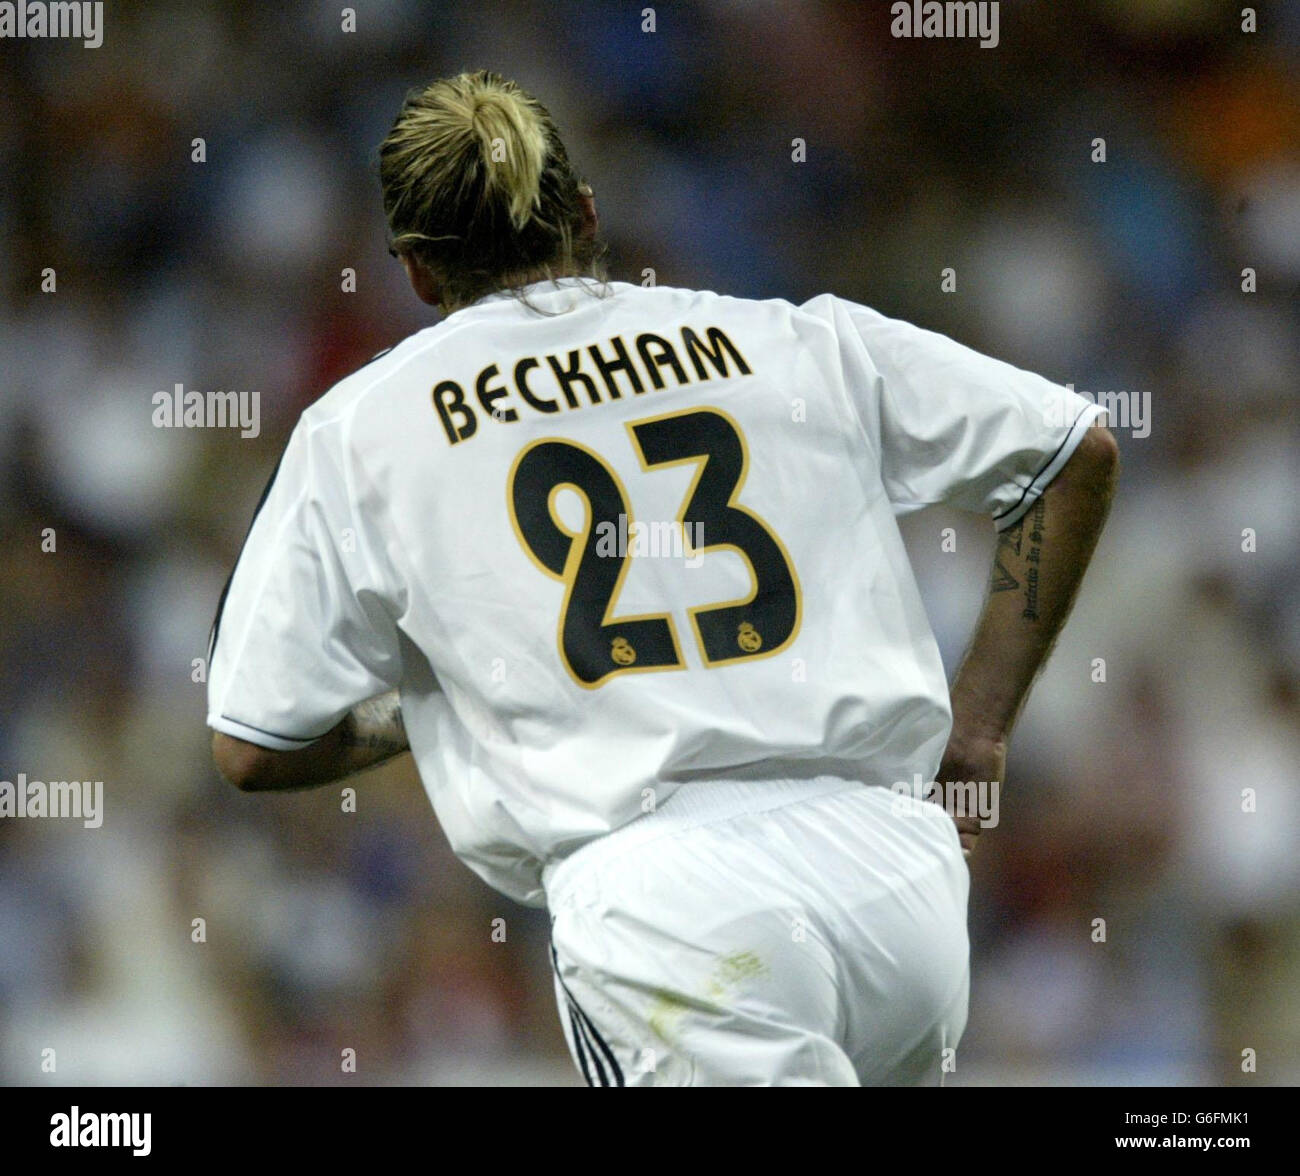 David Beckham in his number 23 shirt during his league debut for Real Madrid in their first game of the Spanish Primera Liga season, against Real Betis, at the Bernabeu Stadium in Madrid, Spain. Stock Photo